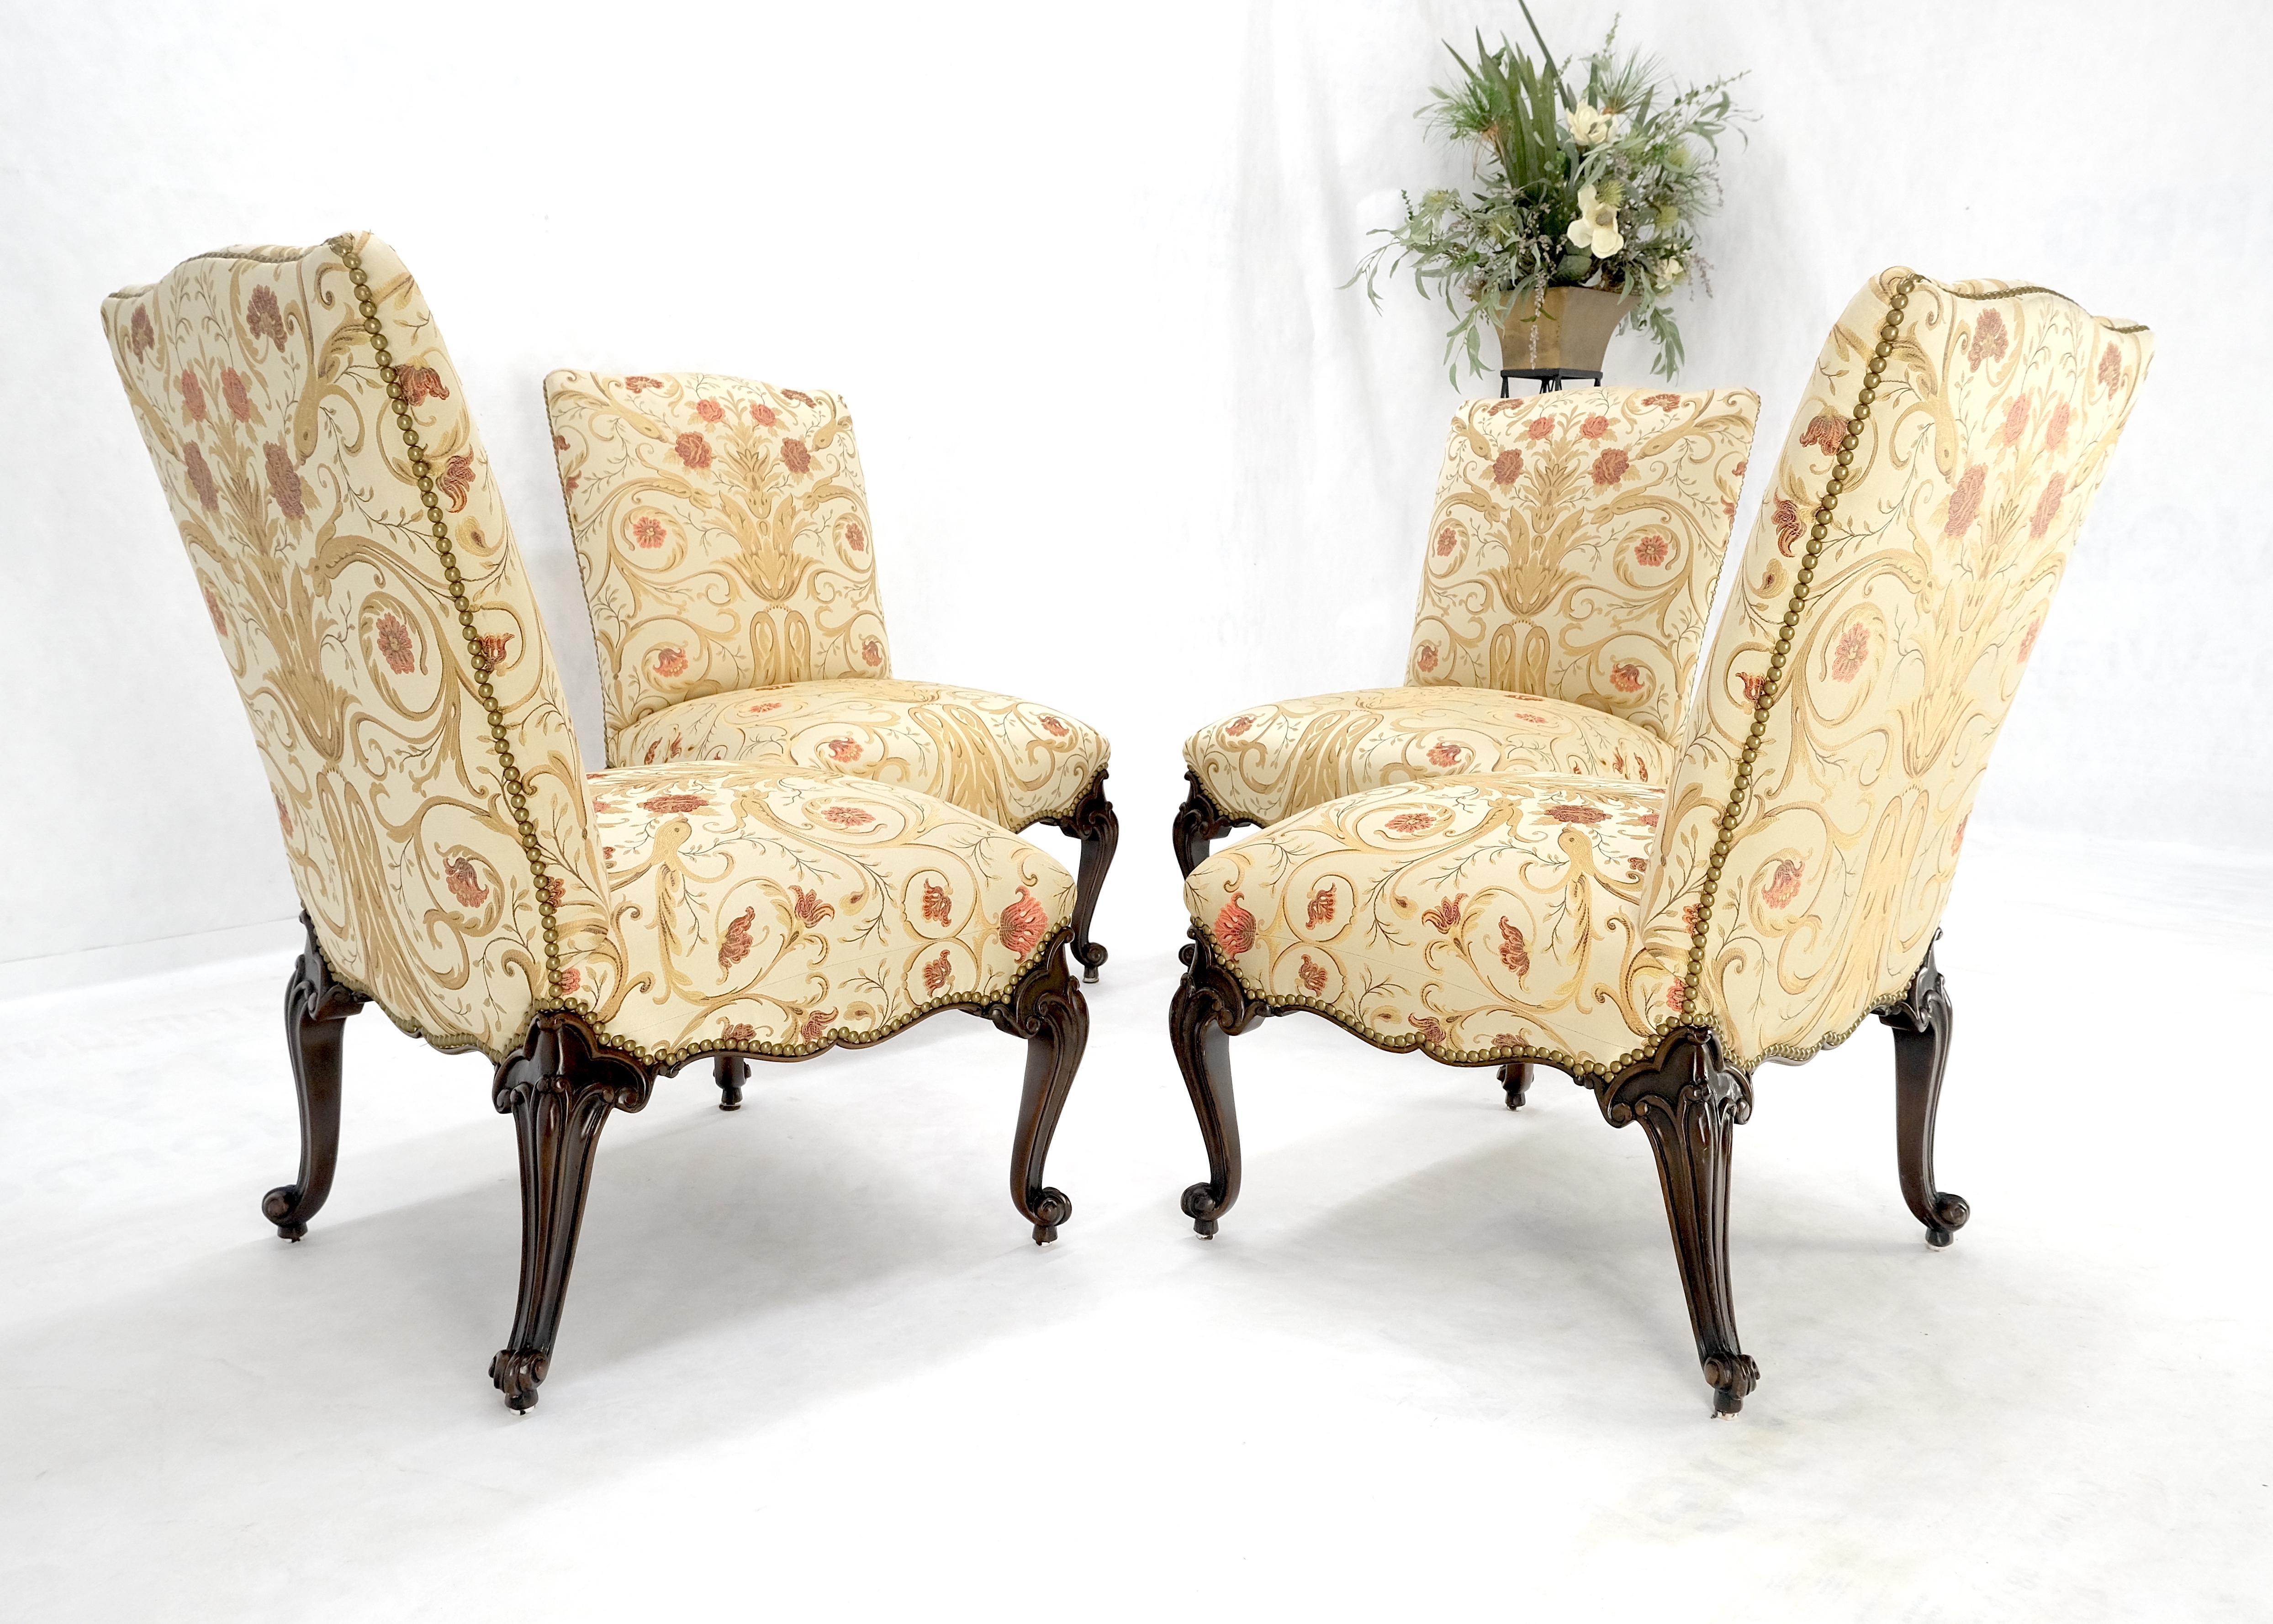 Set 4 Floral Gold & Red Upholstery Fine Carved Legs Slipper Lounge Chairs MINT! For Sale 4